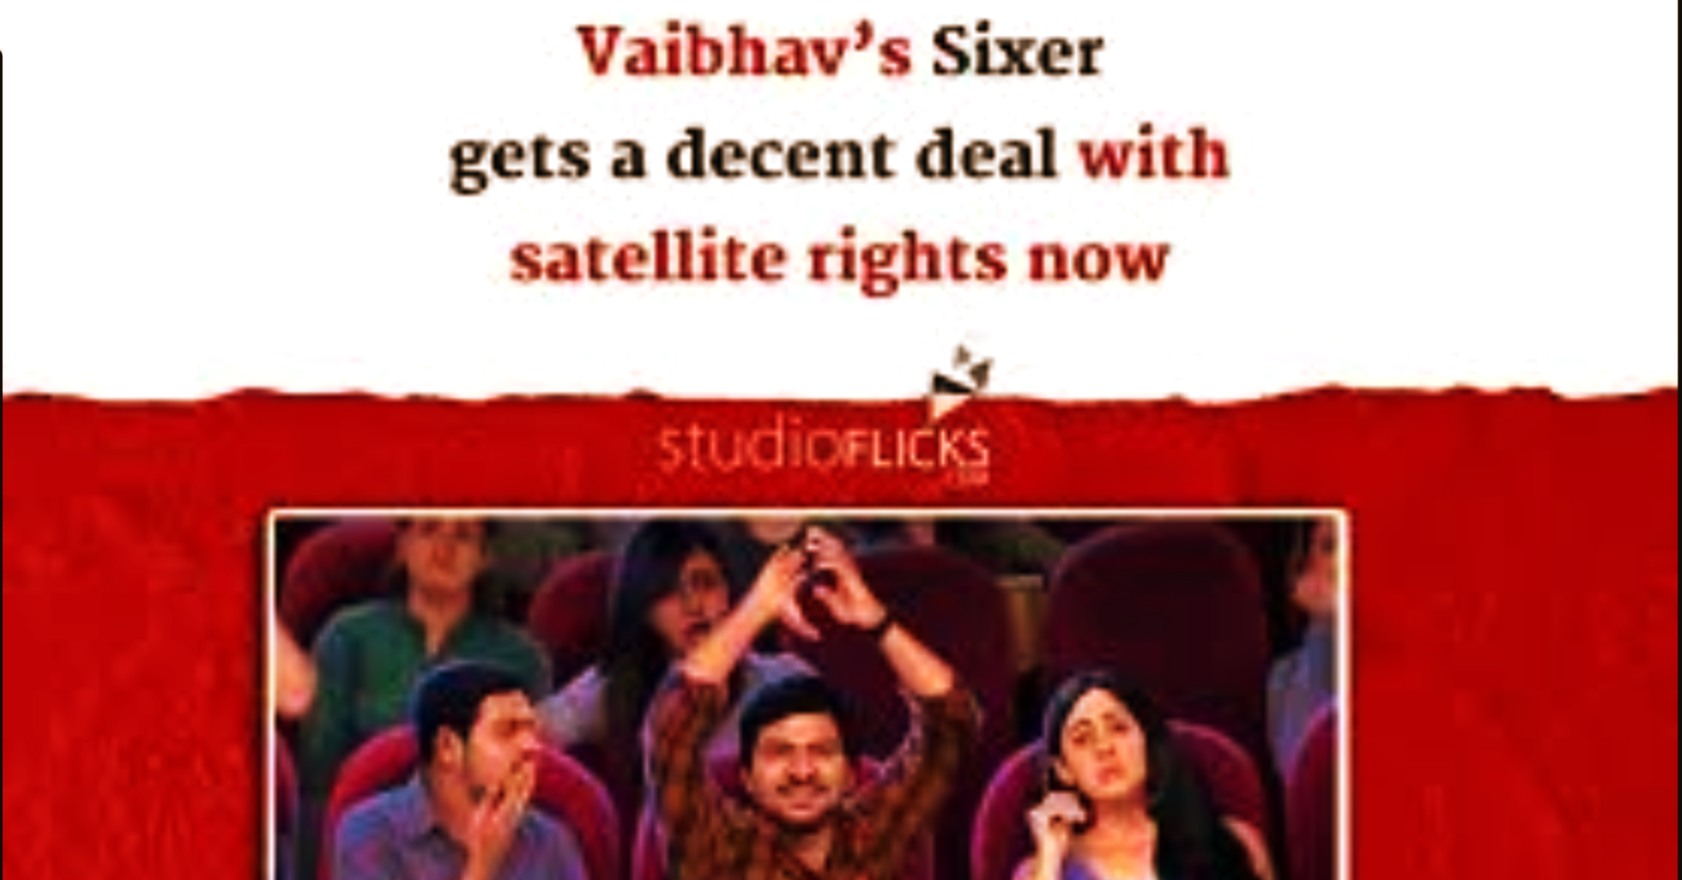 Vaibhav’s Sixer Gets A Decent Deal With Satellite Rights Now